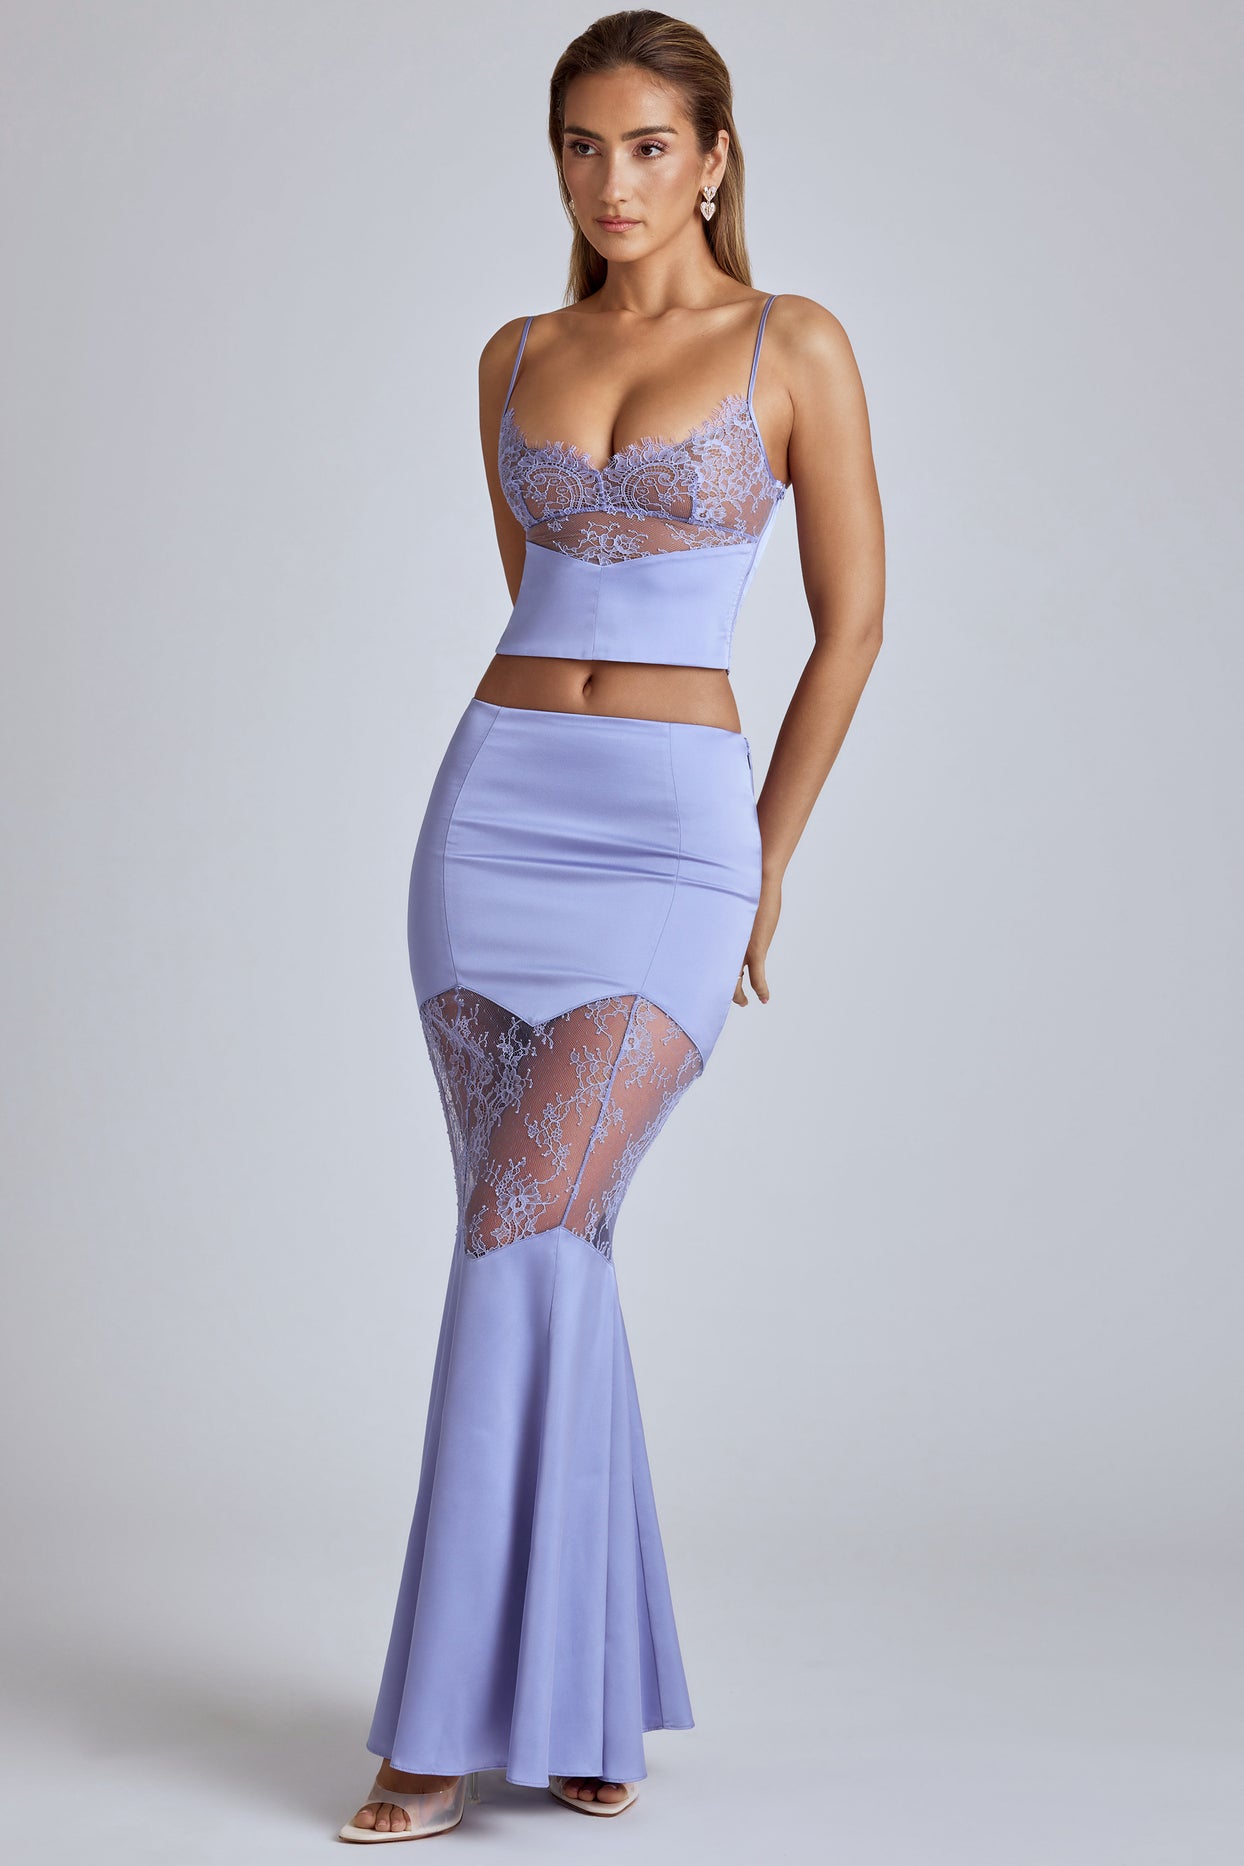 Lace Panel Cami Top in Blue Lavender